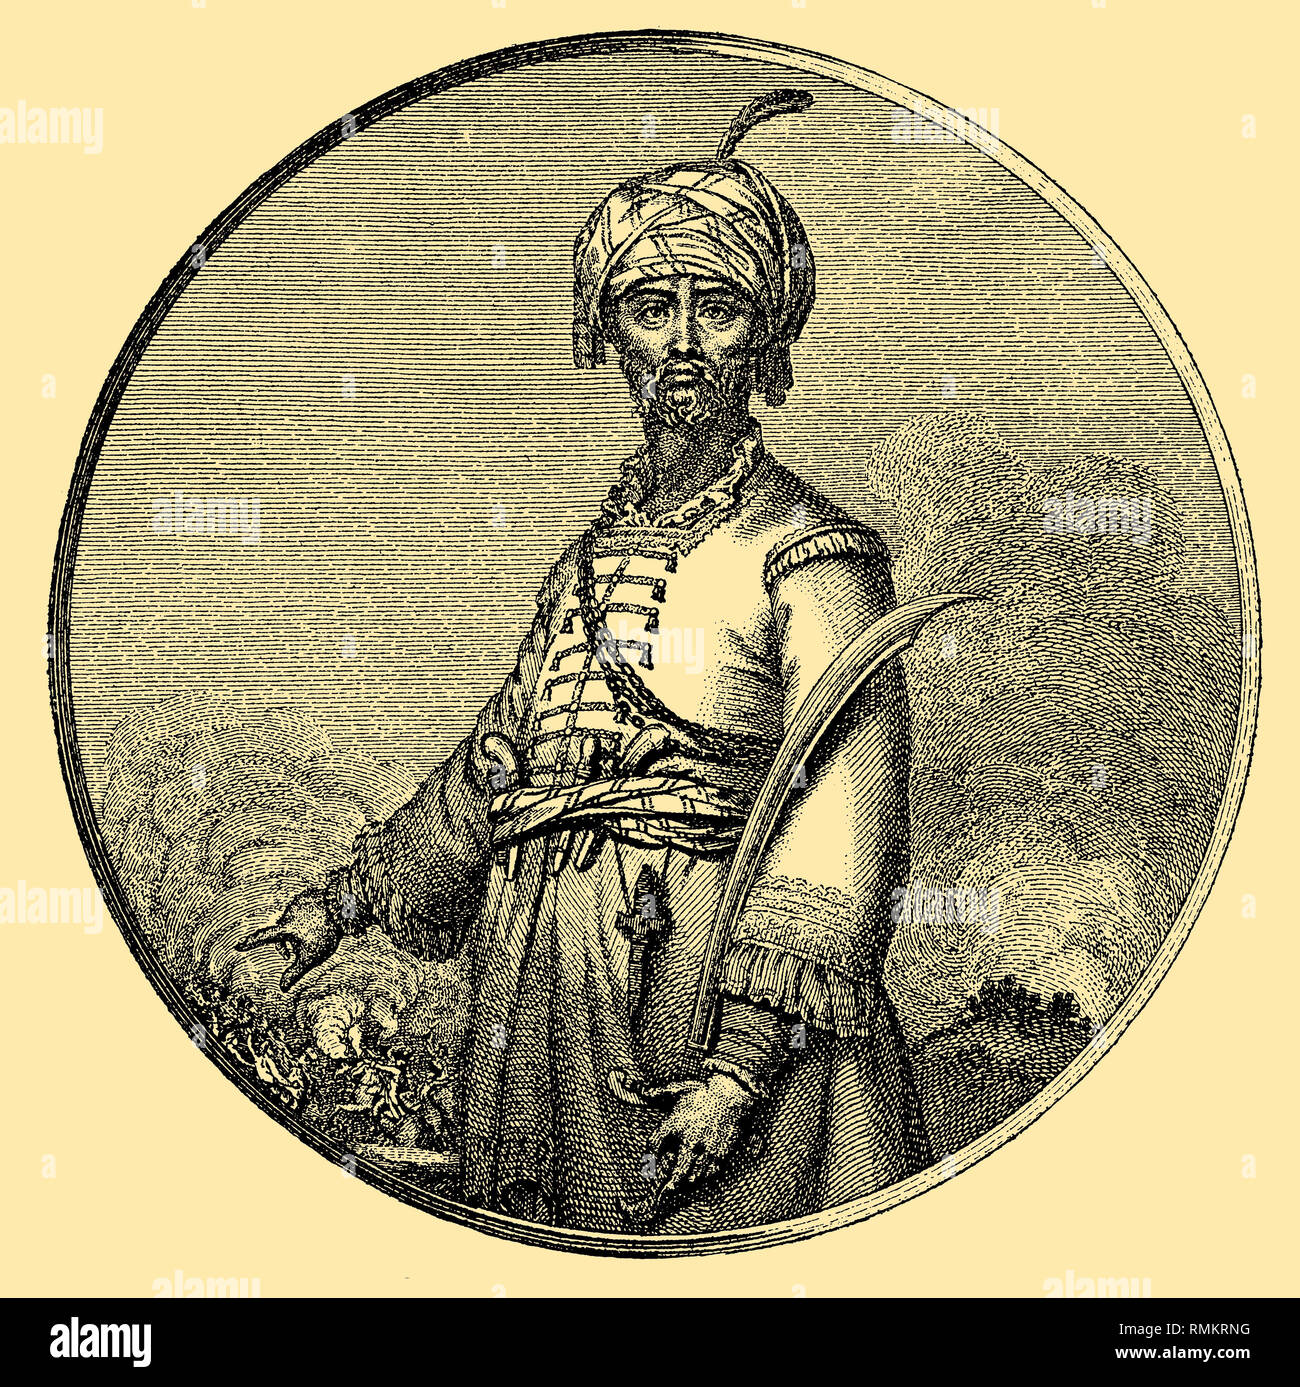 Haidar Ali or Hyder Ali  South Indian commander and eminent opponent of the British East India Company, Year, Le Beau  1899 Stock Photo